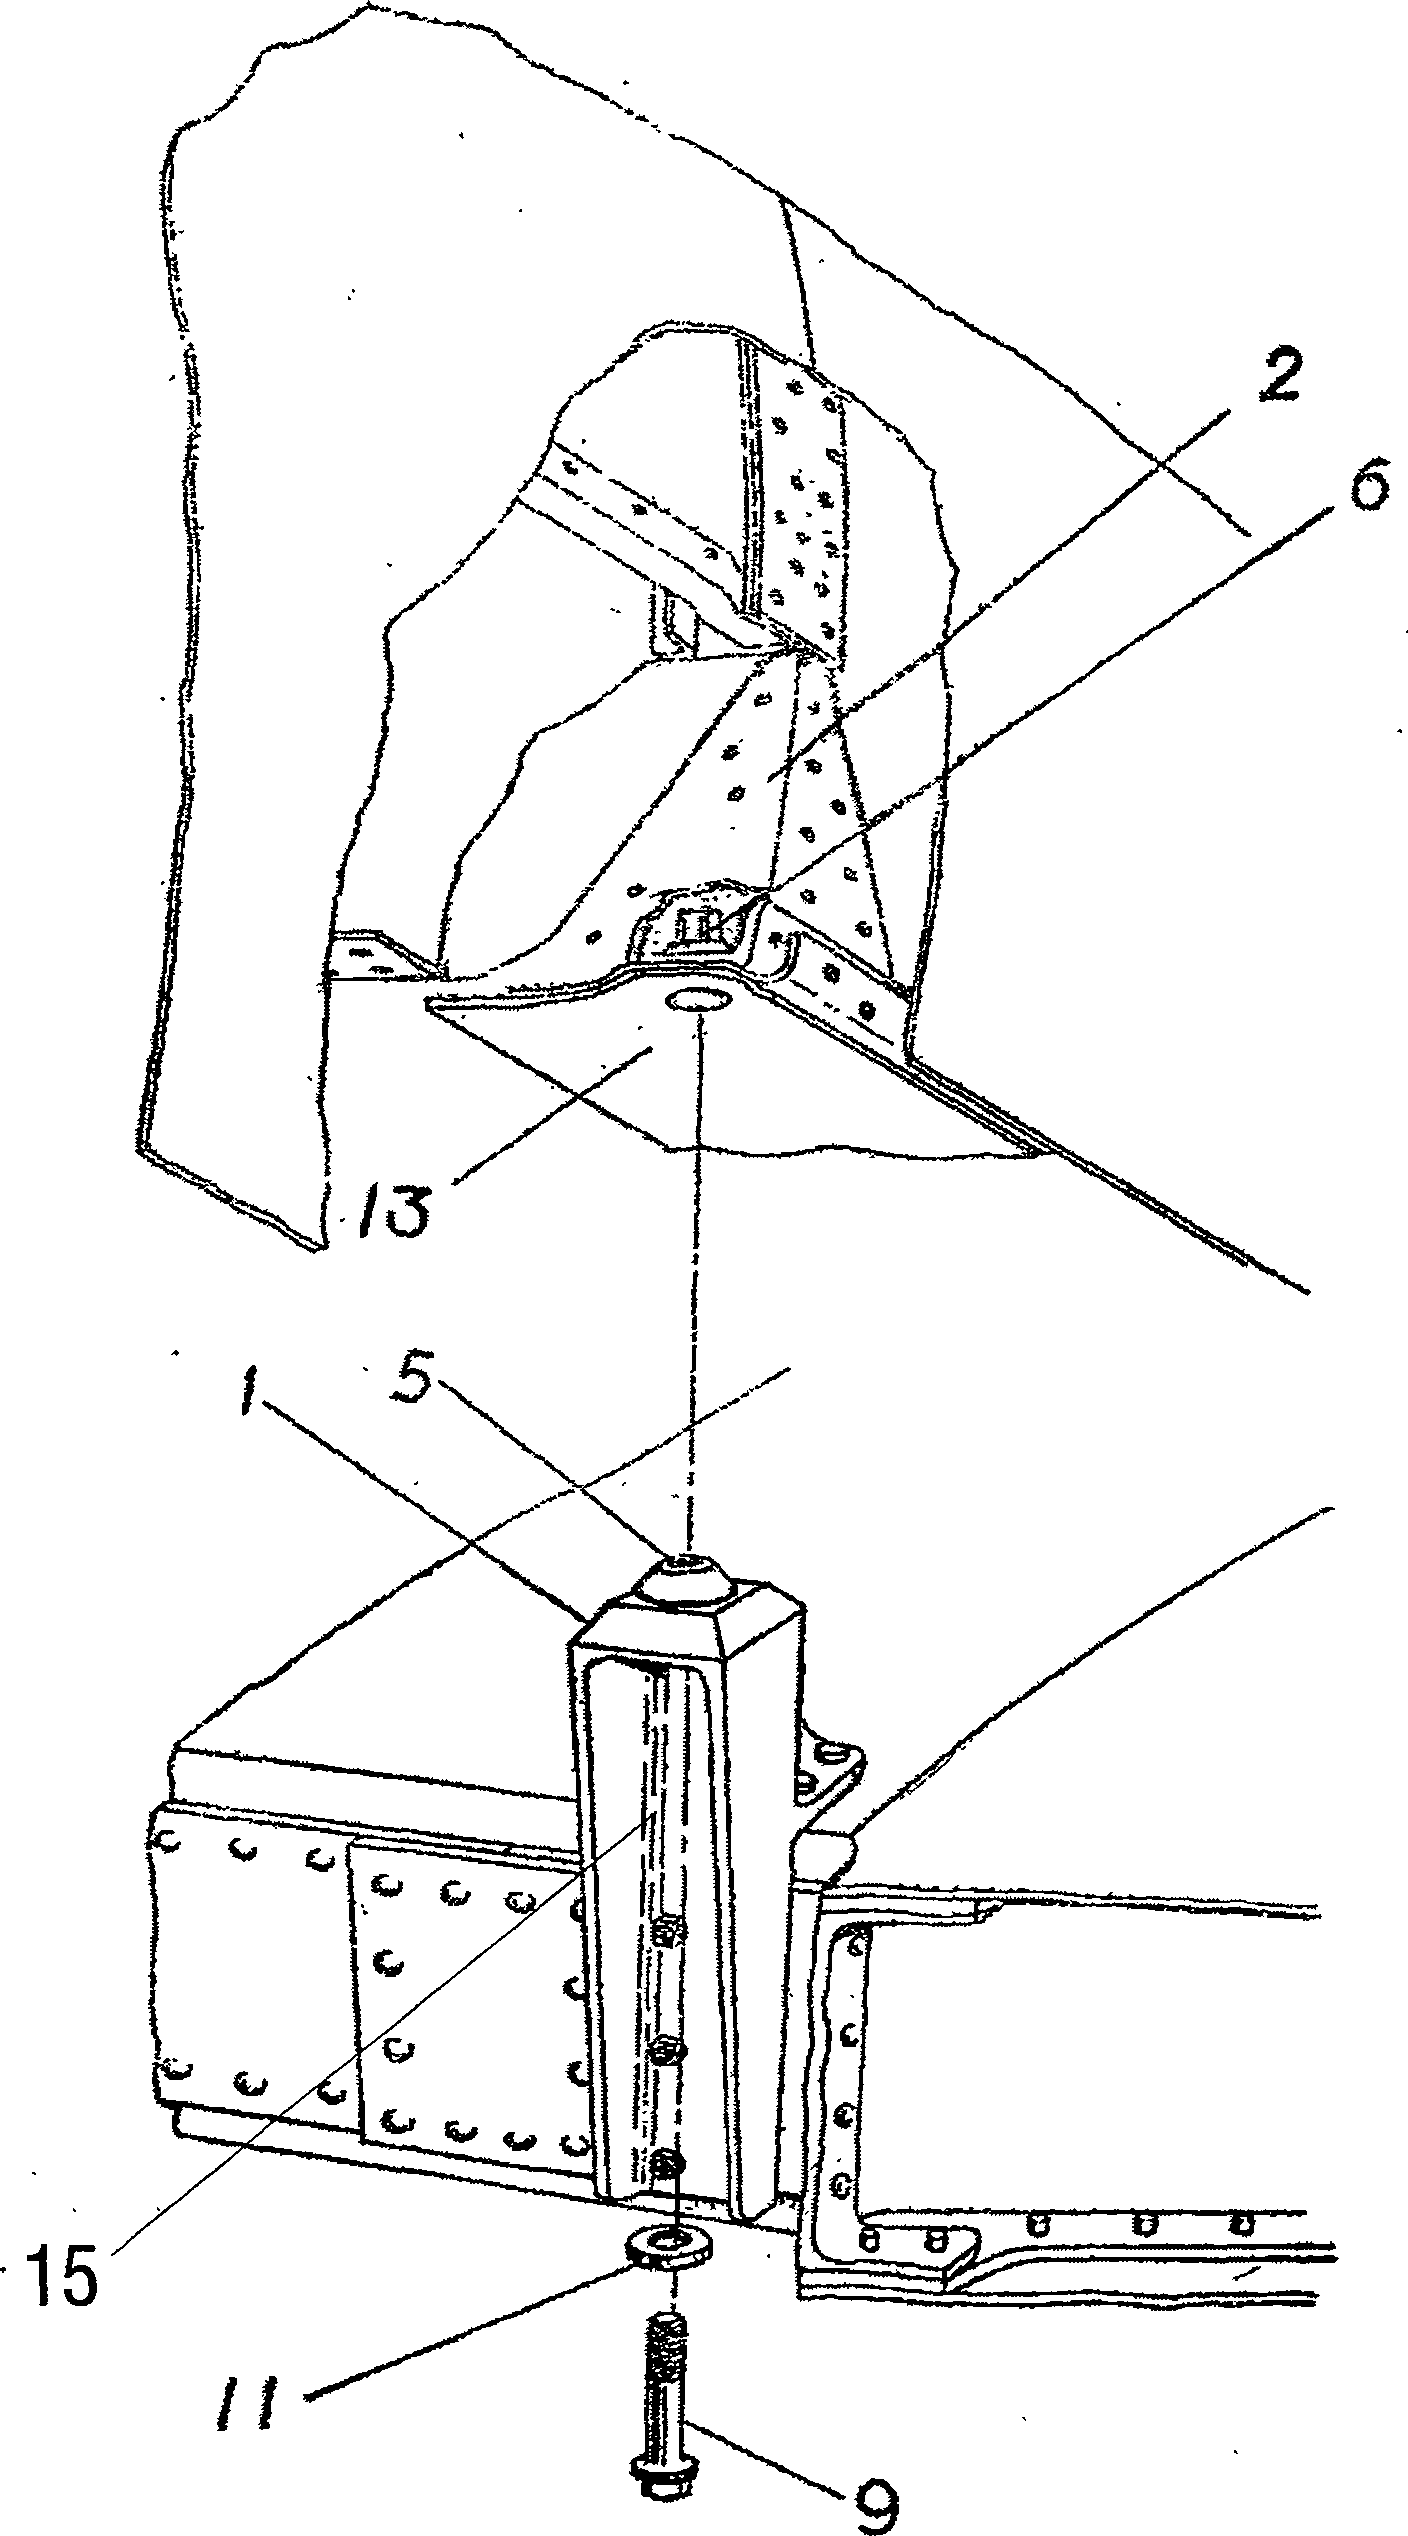 Connecting structure for unmanned aerial vehicle body and wing